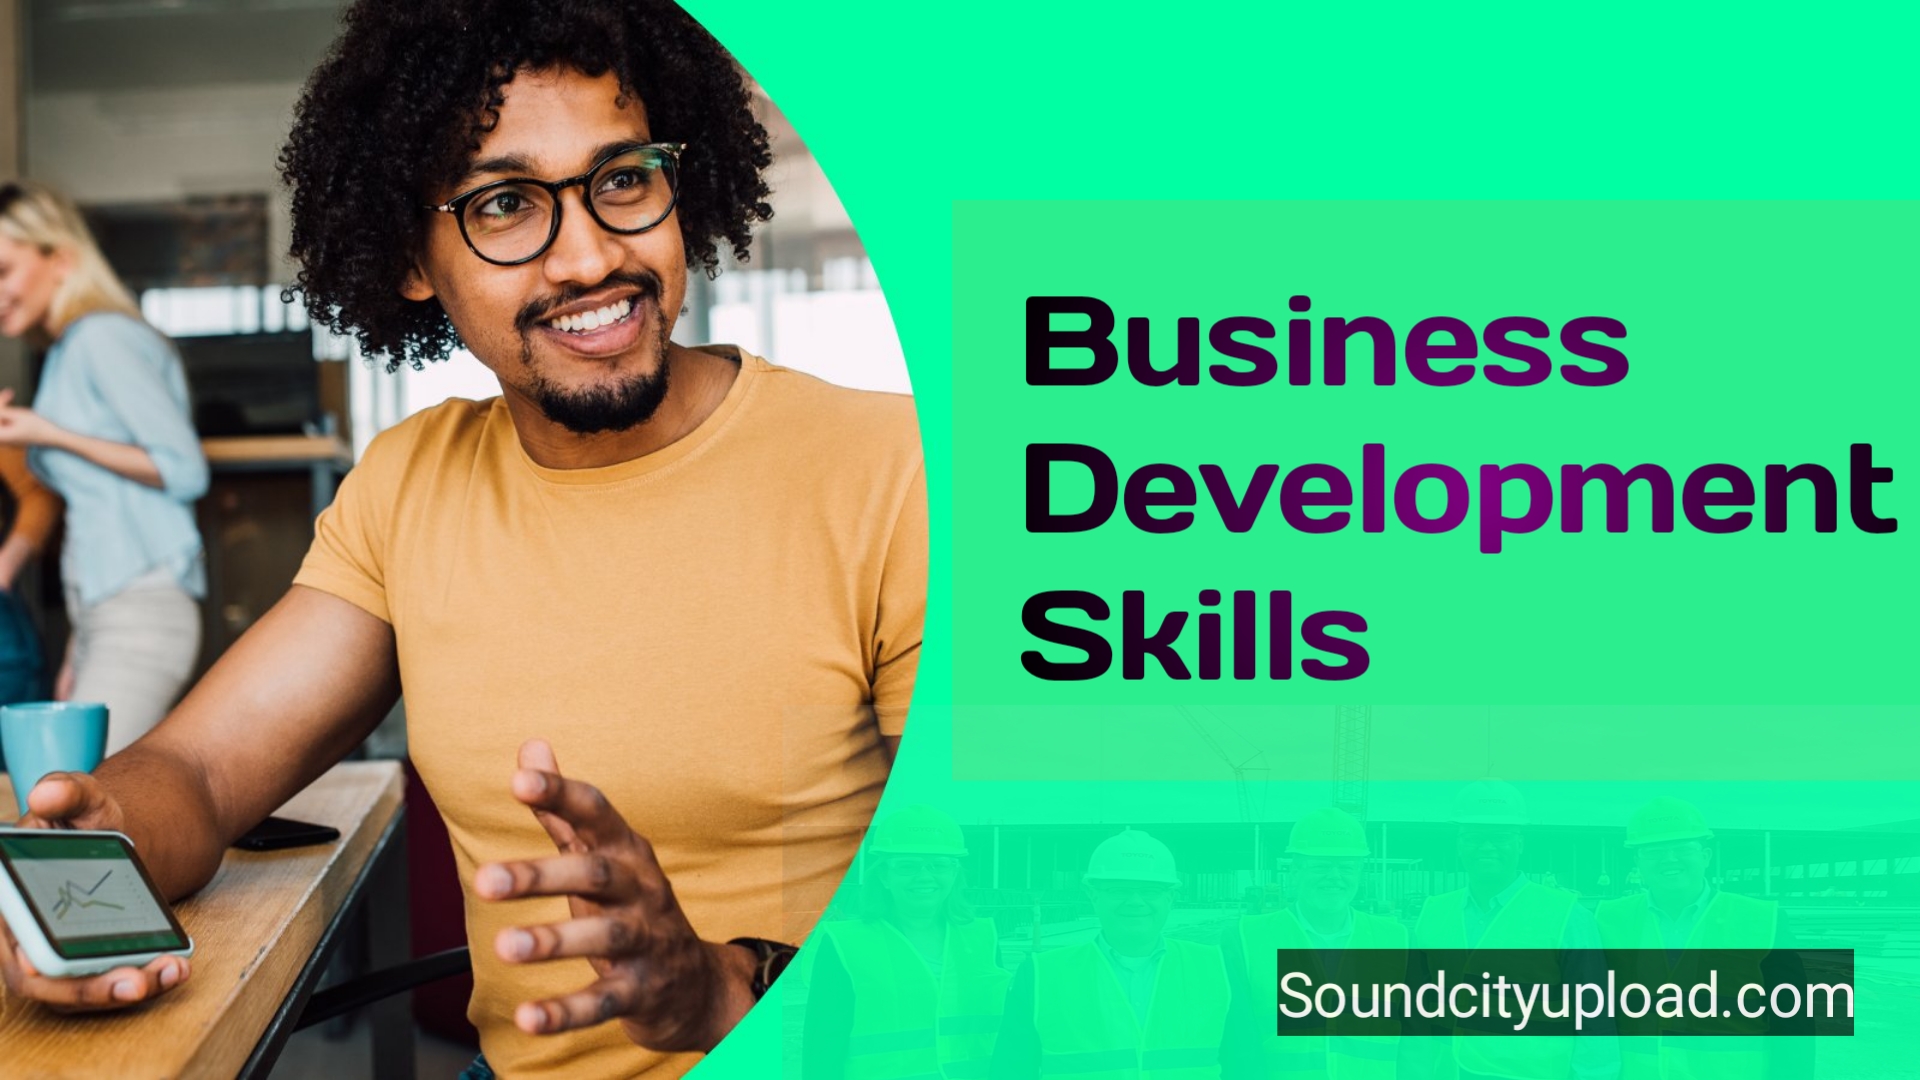 The Best Business Development Skills for Growing Businesses